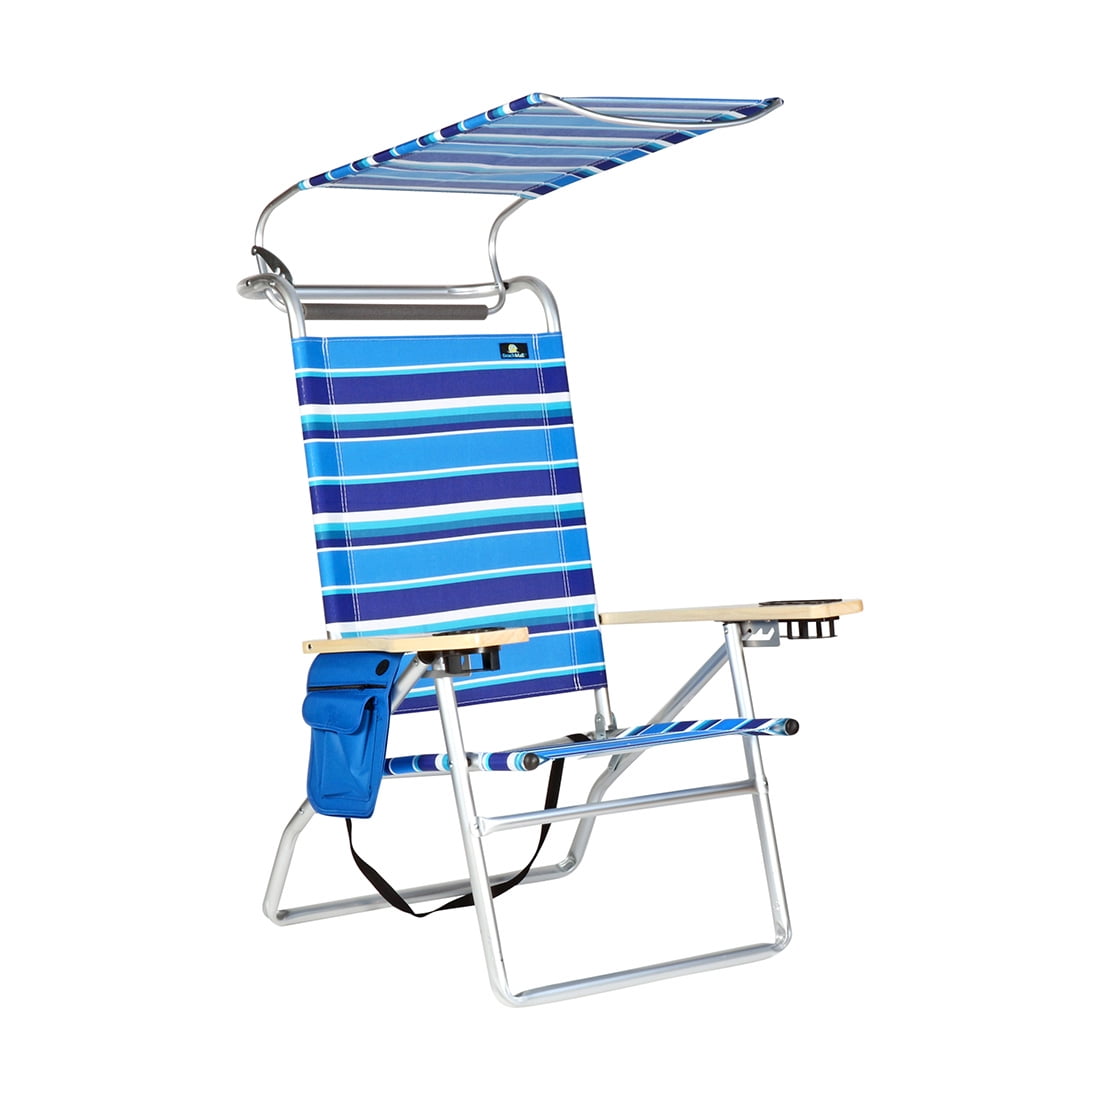 New Beach Chair With Pouch for Simple Design